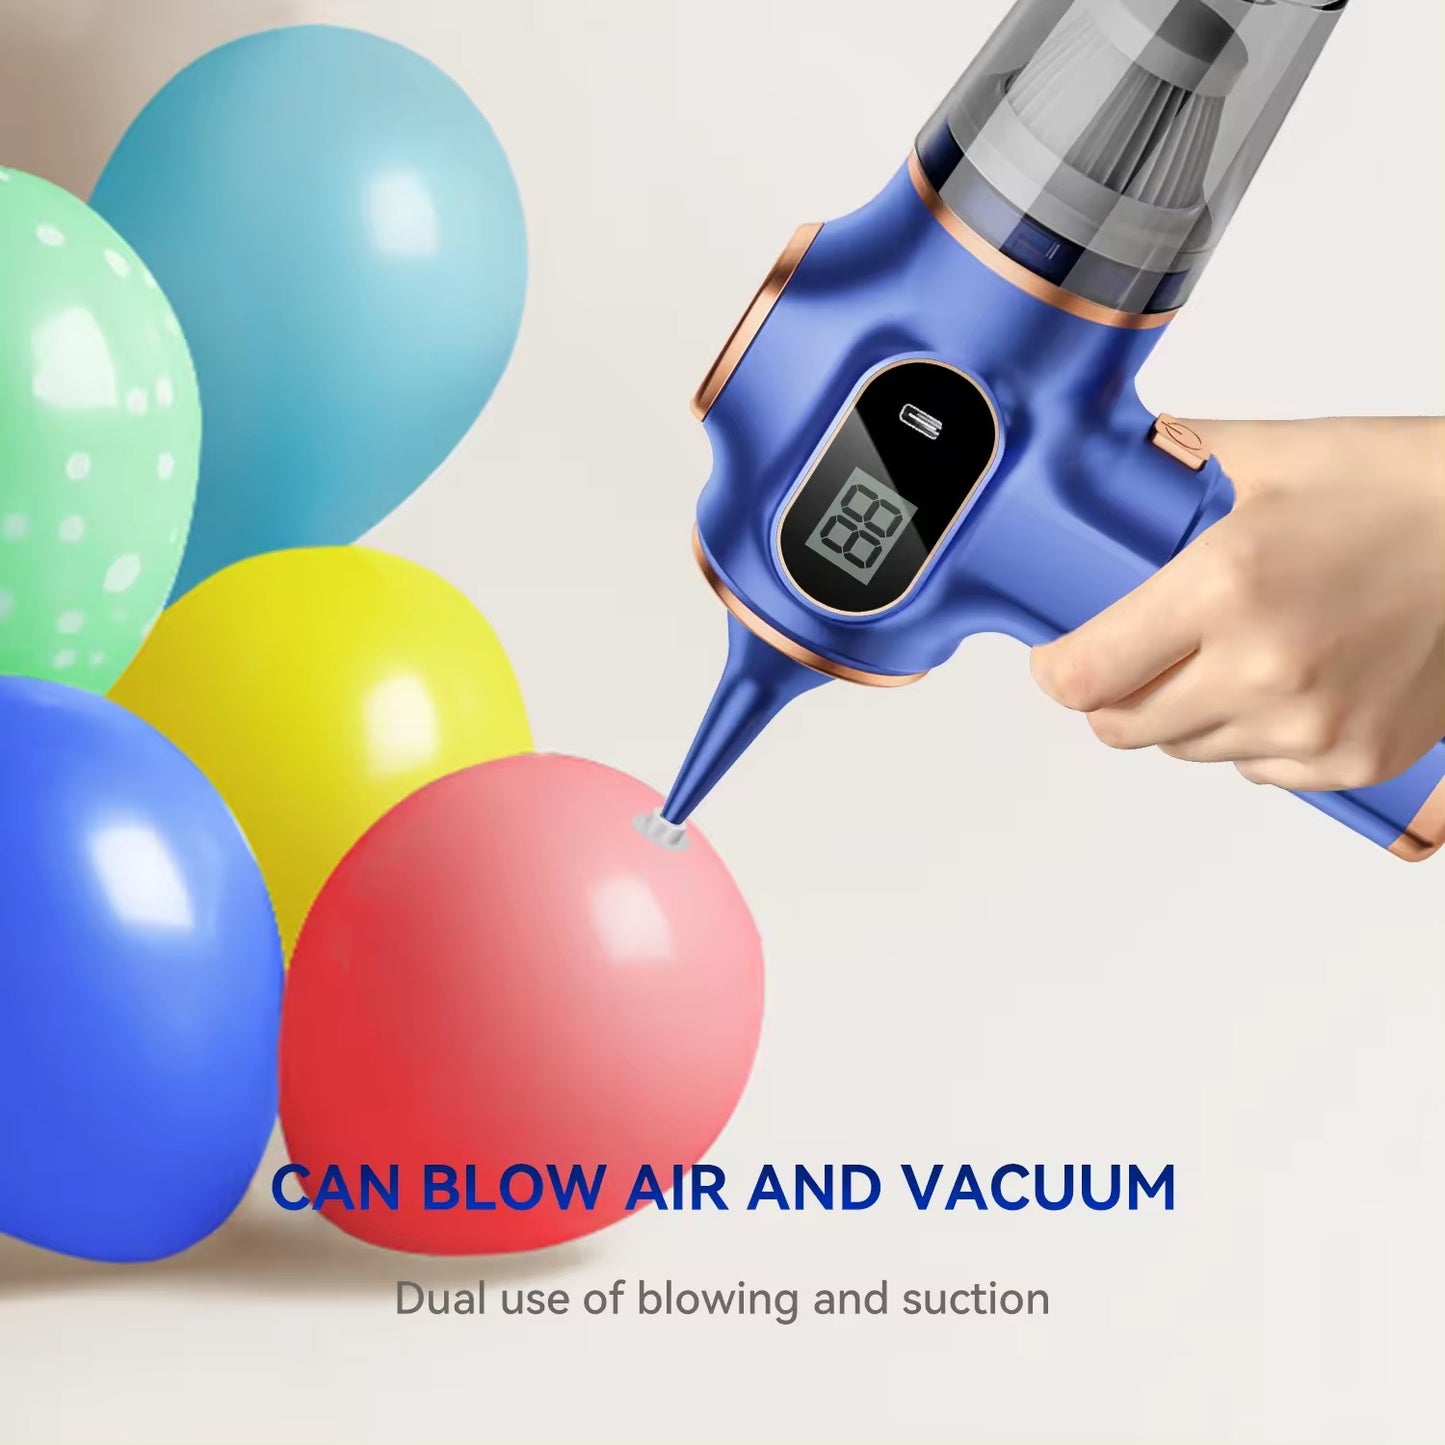 Portable Vacuum Cleaner Wireless Blowing Suction One High Power Vehicle laptop Multifunction Powerful Car Vacuum Cleaner